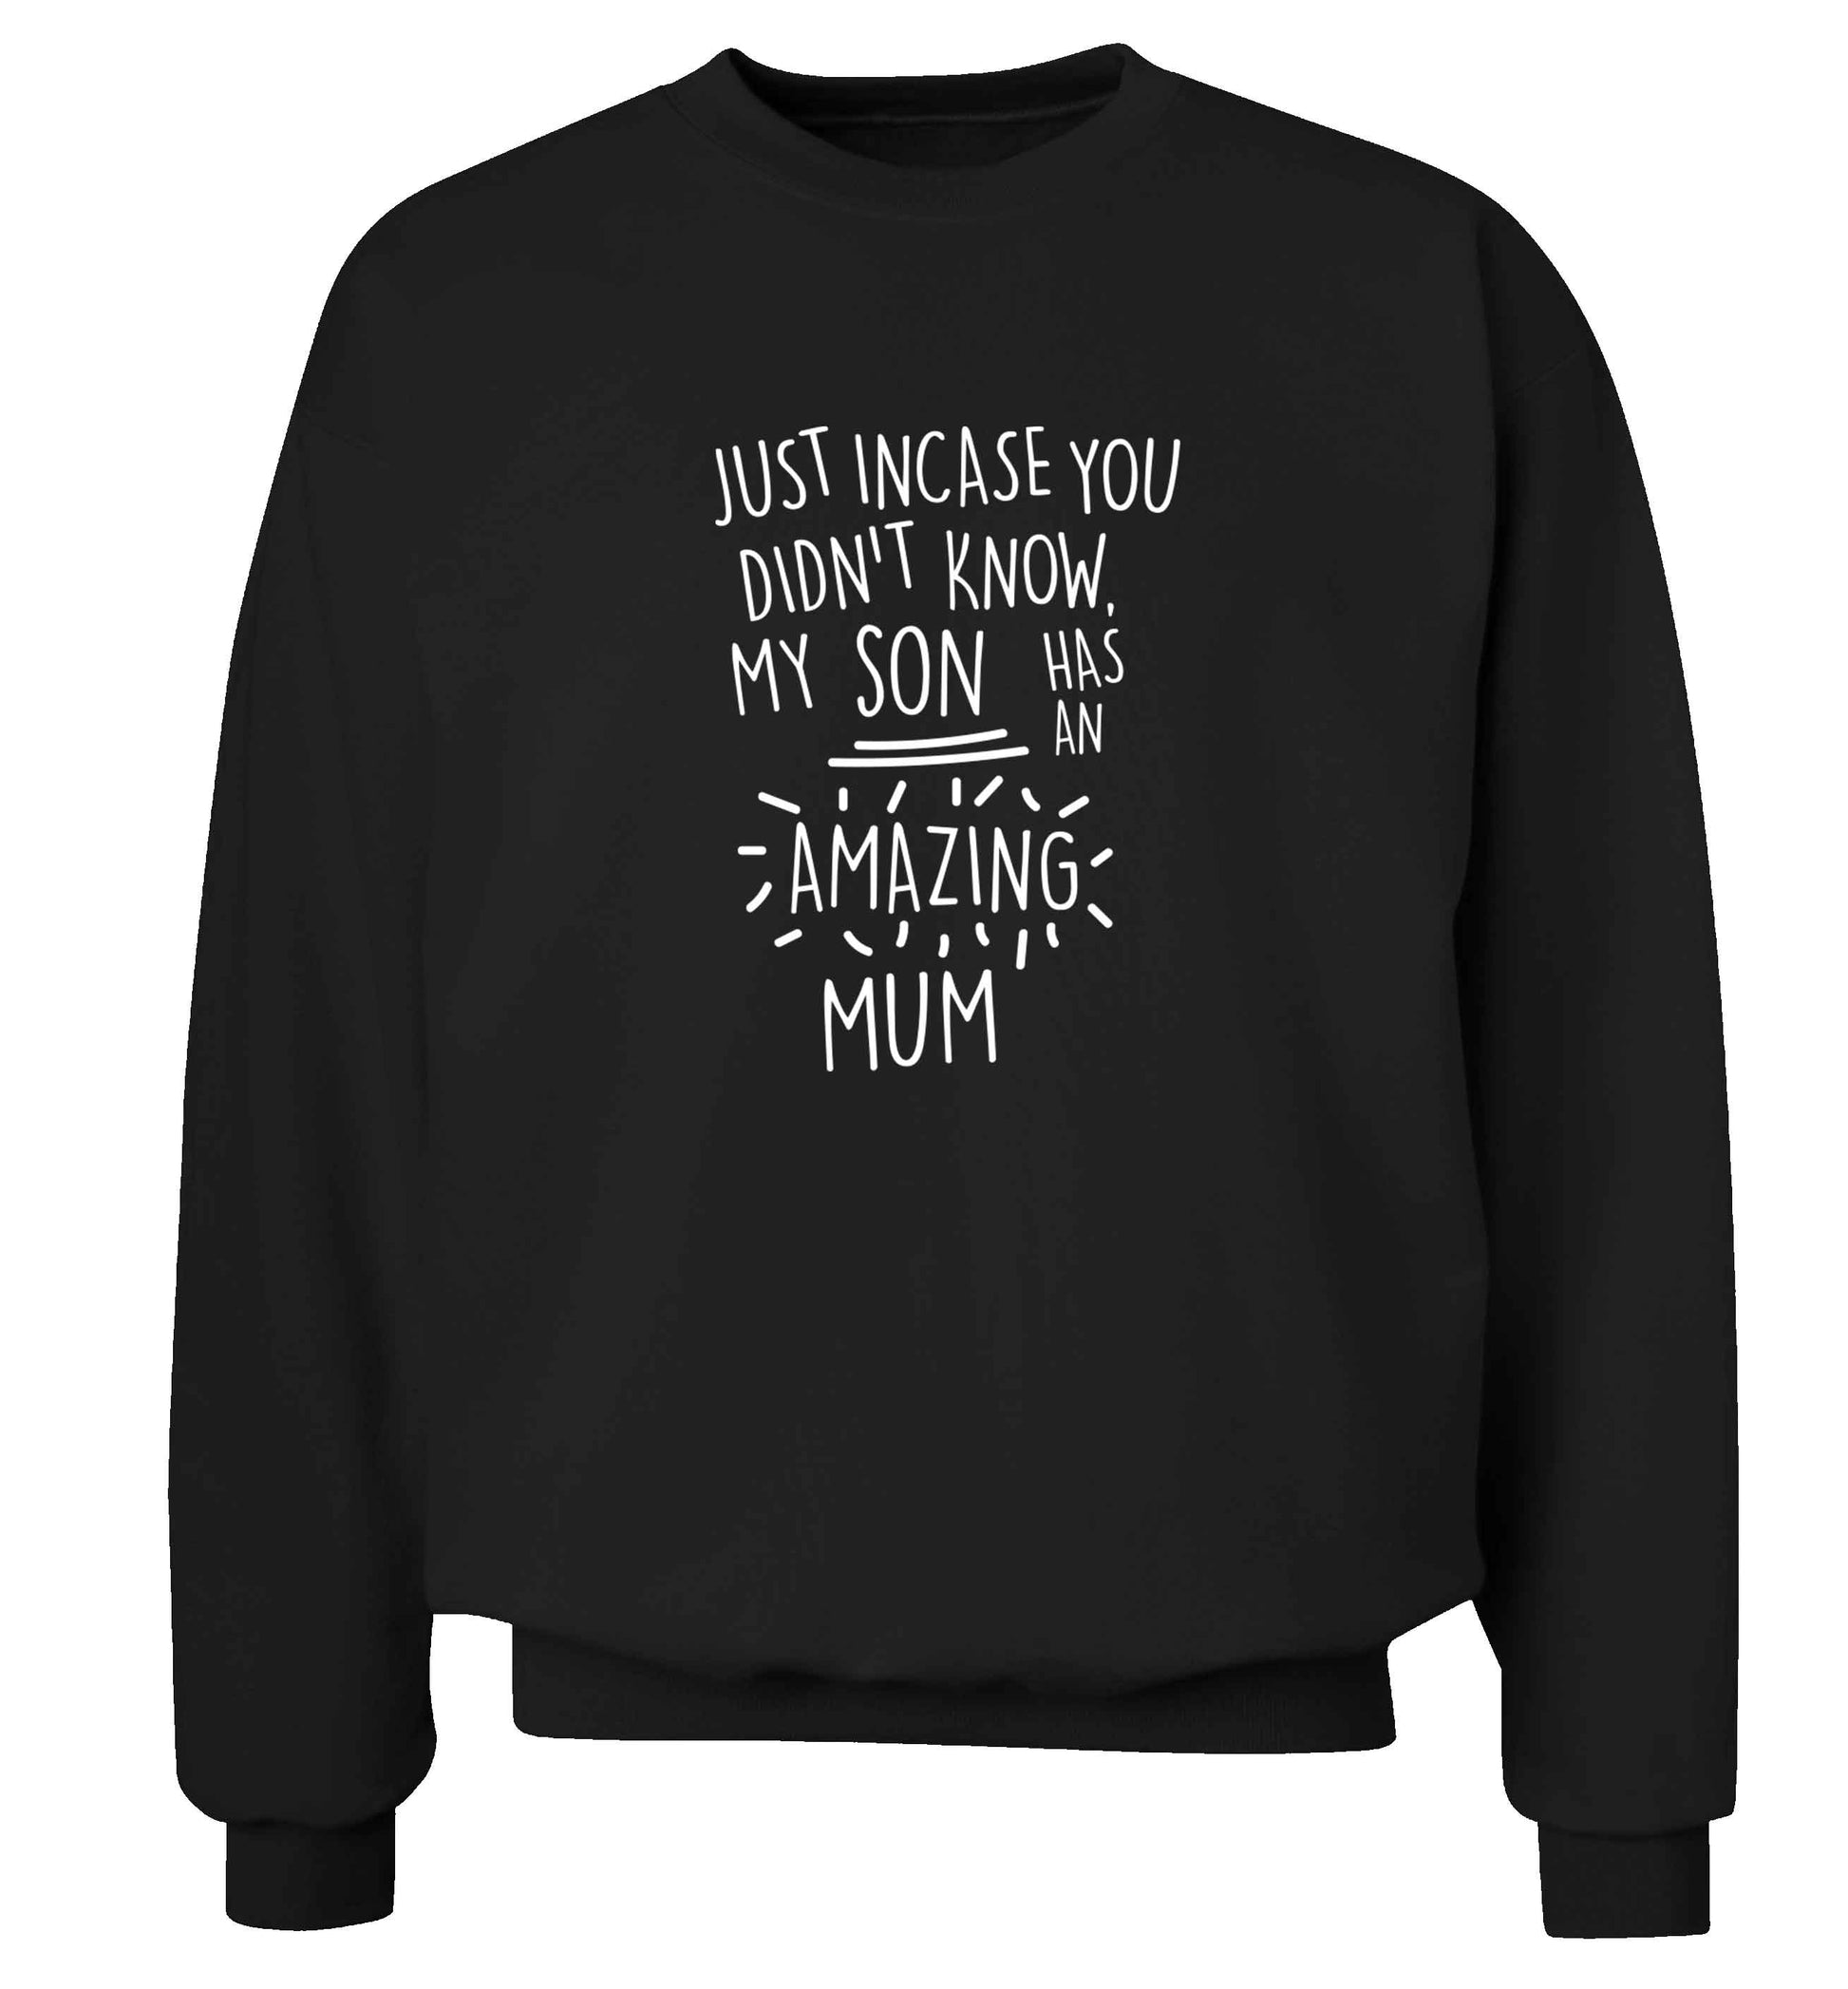 Just incase you didn't know my son has an amazing mum adult's unisex black sweater 2XL